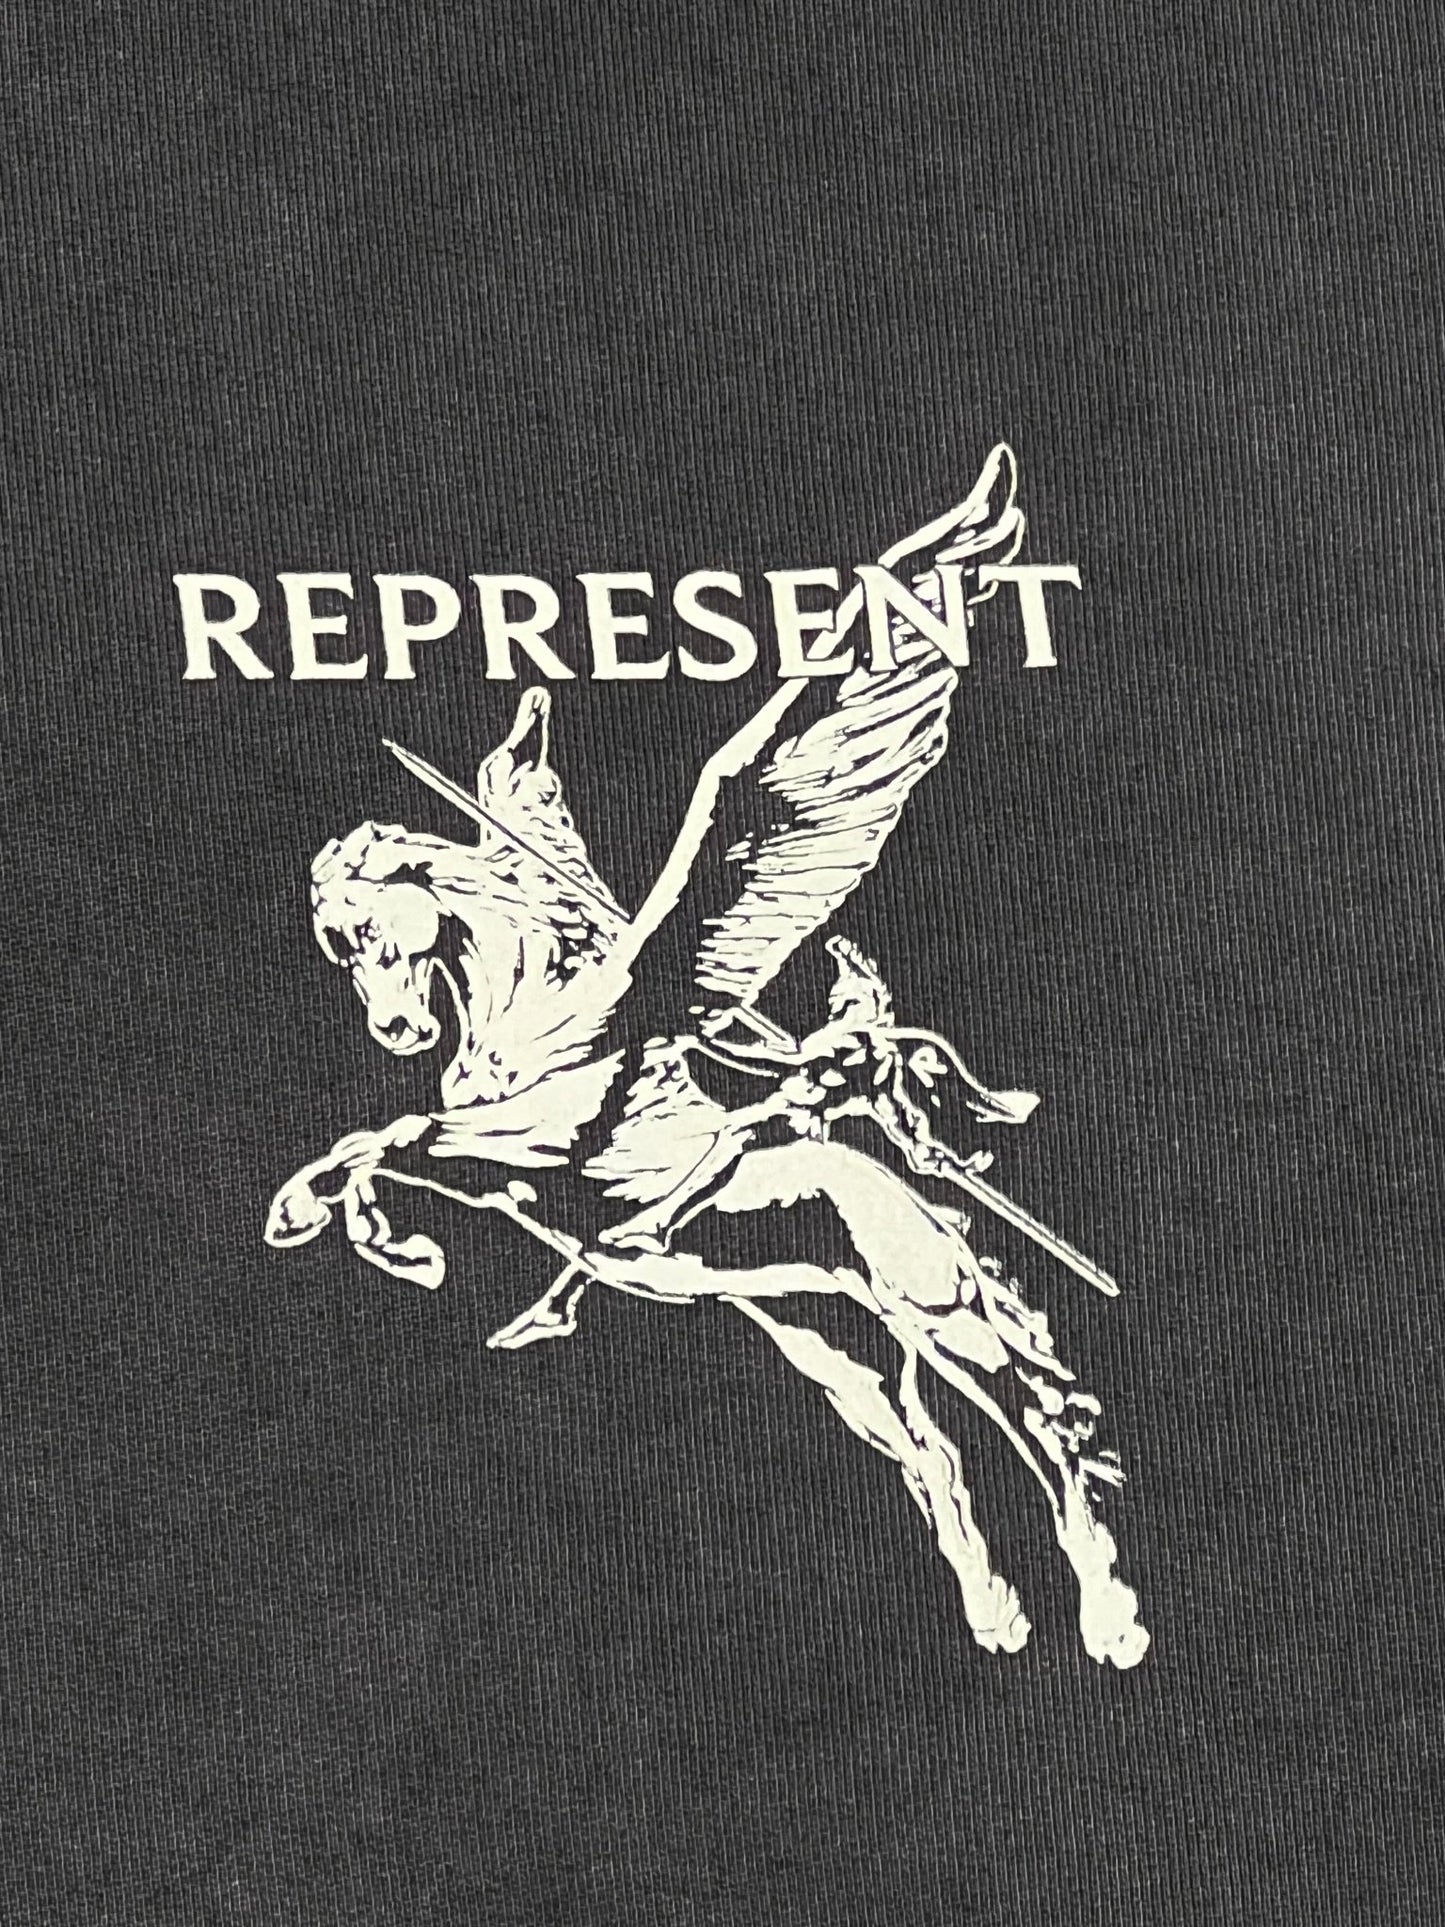 A REPRESENT black hoodie with the word "represent" and a Bellerophon graphic on it.